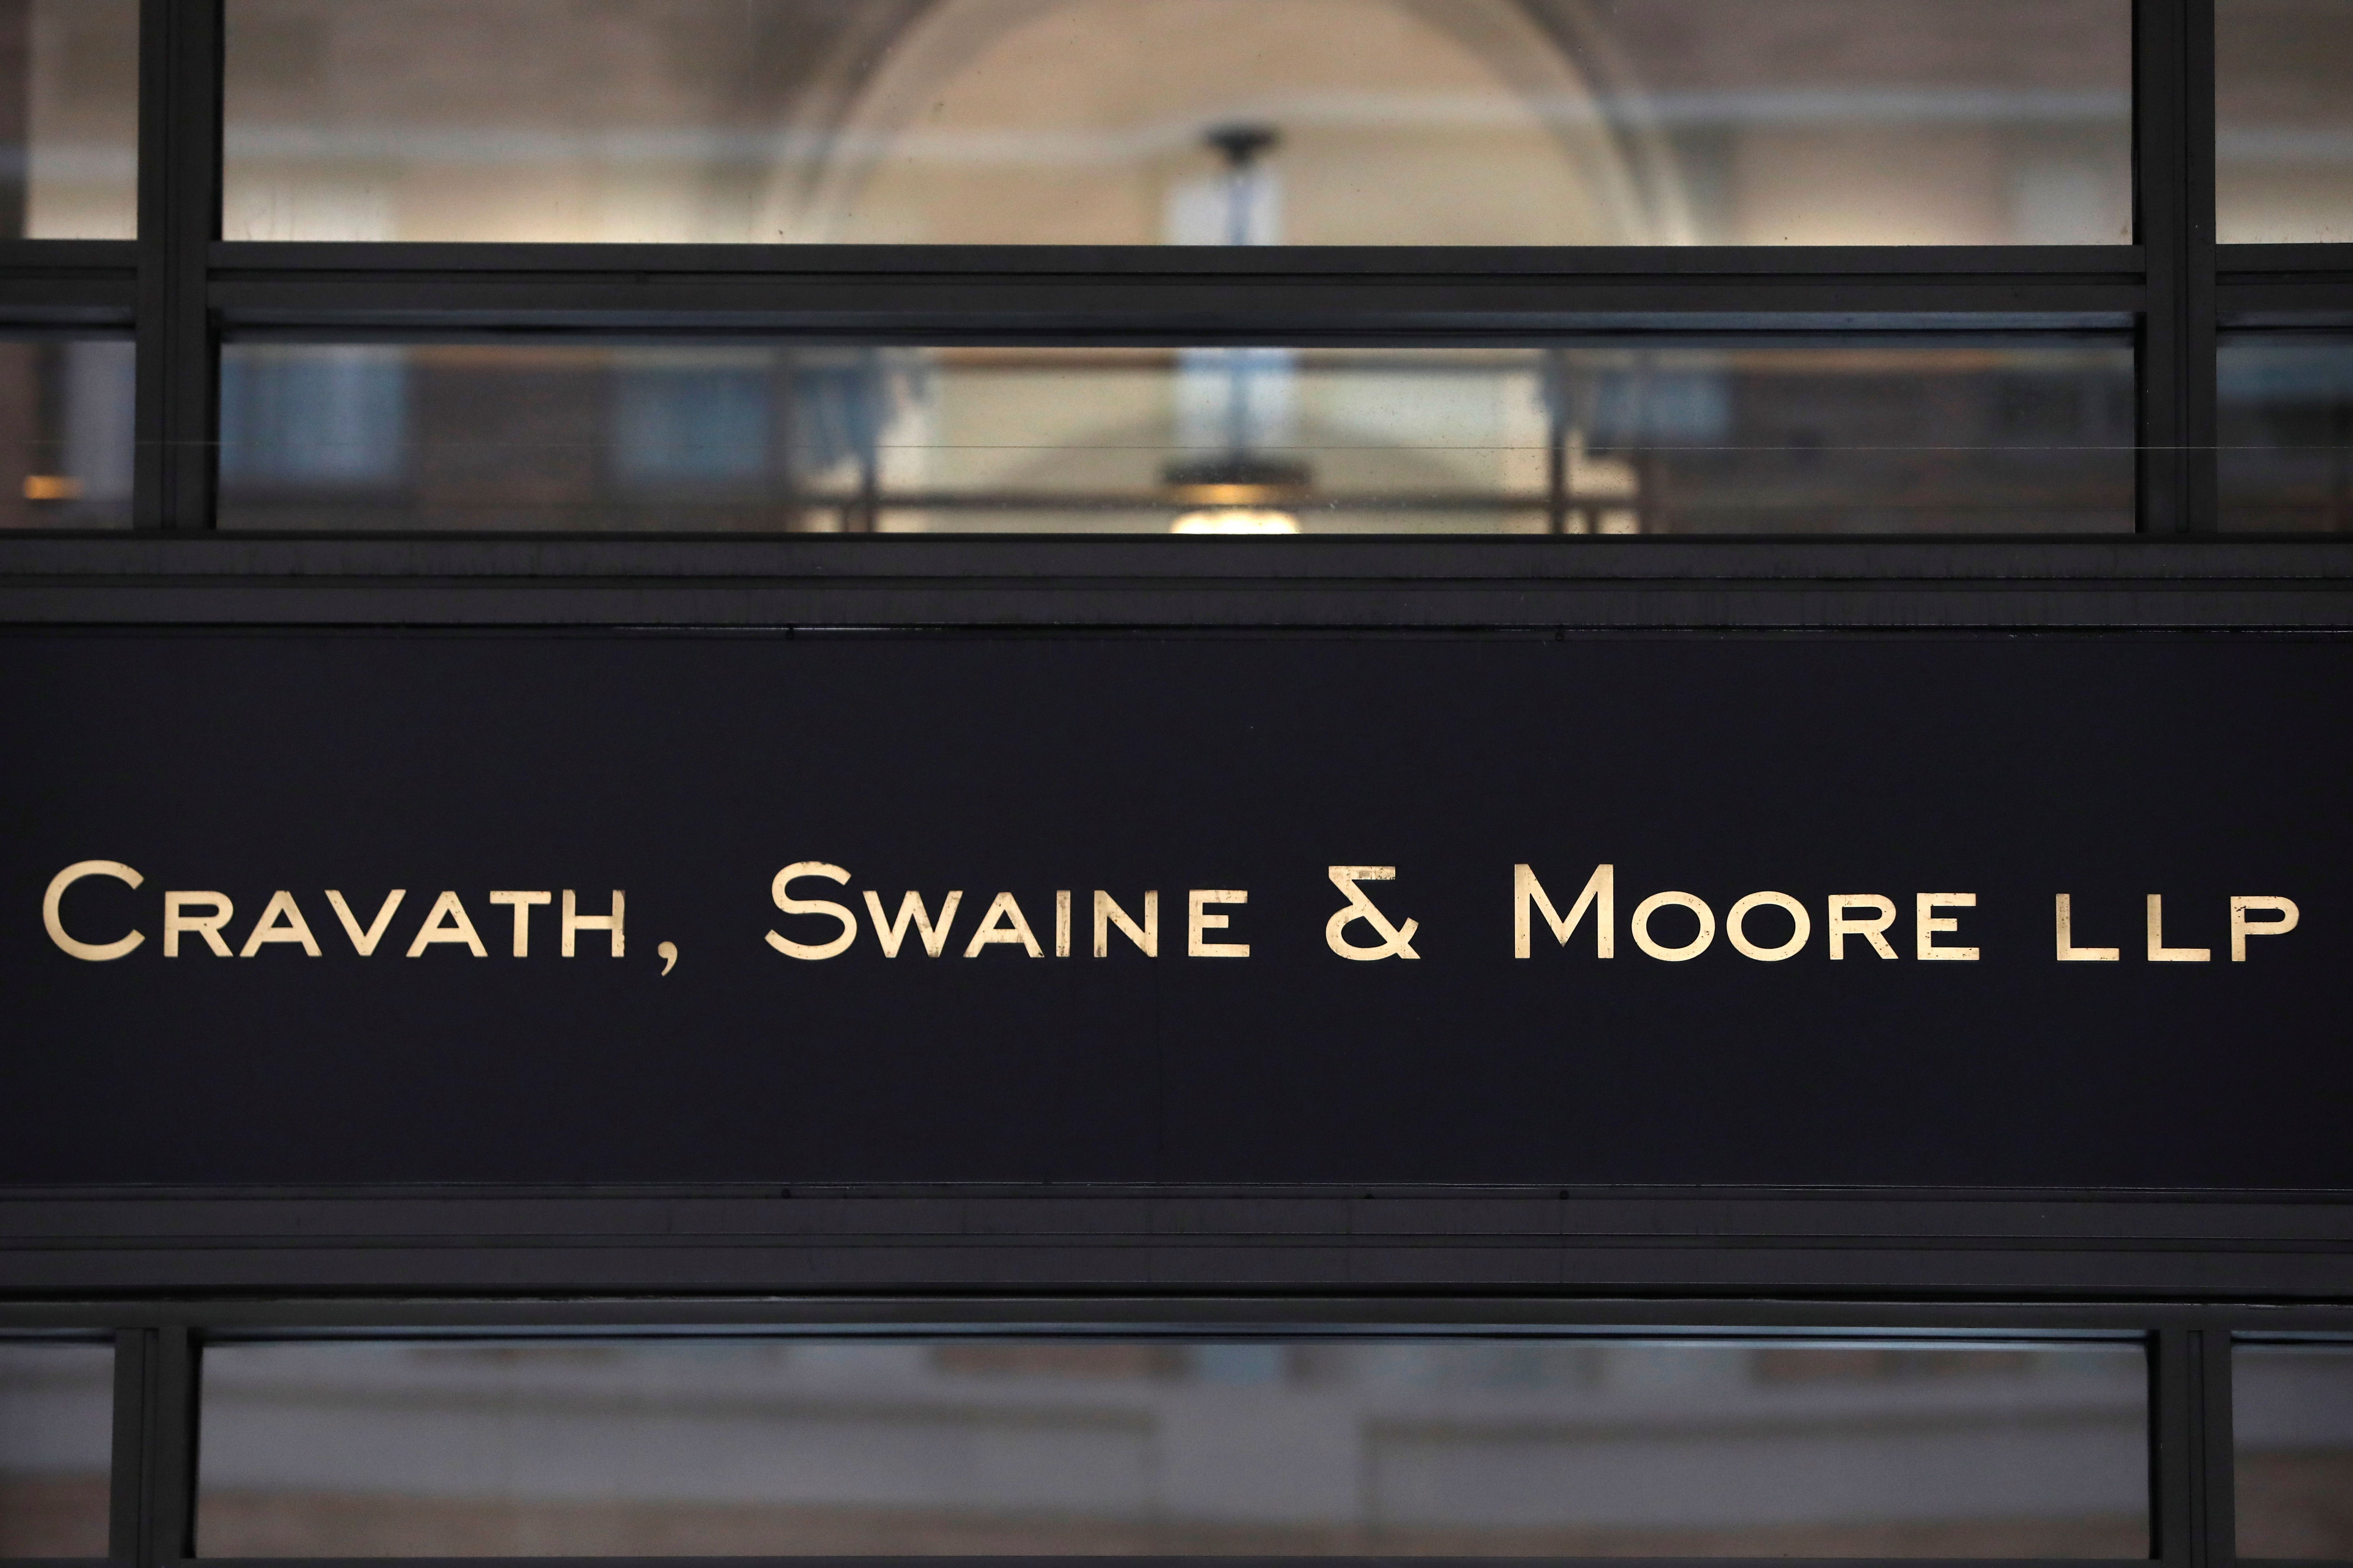 Signage is seen on the exterior of the building where law firm Cravath, Swaine & Moore LLP are located in Manhattan, New York City